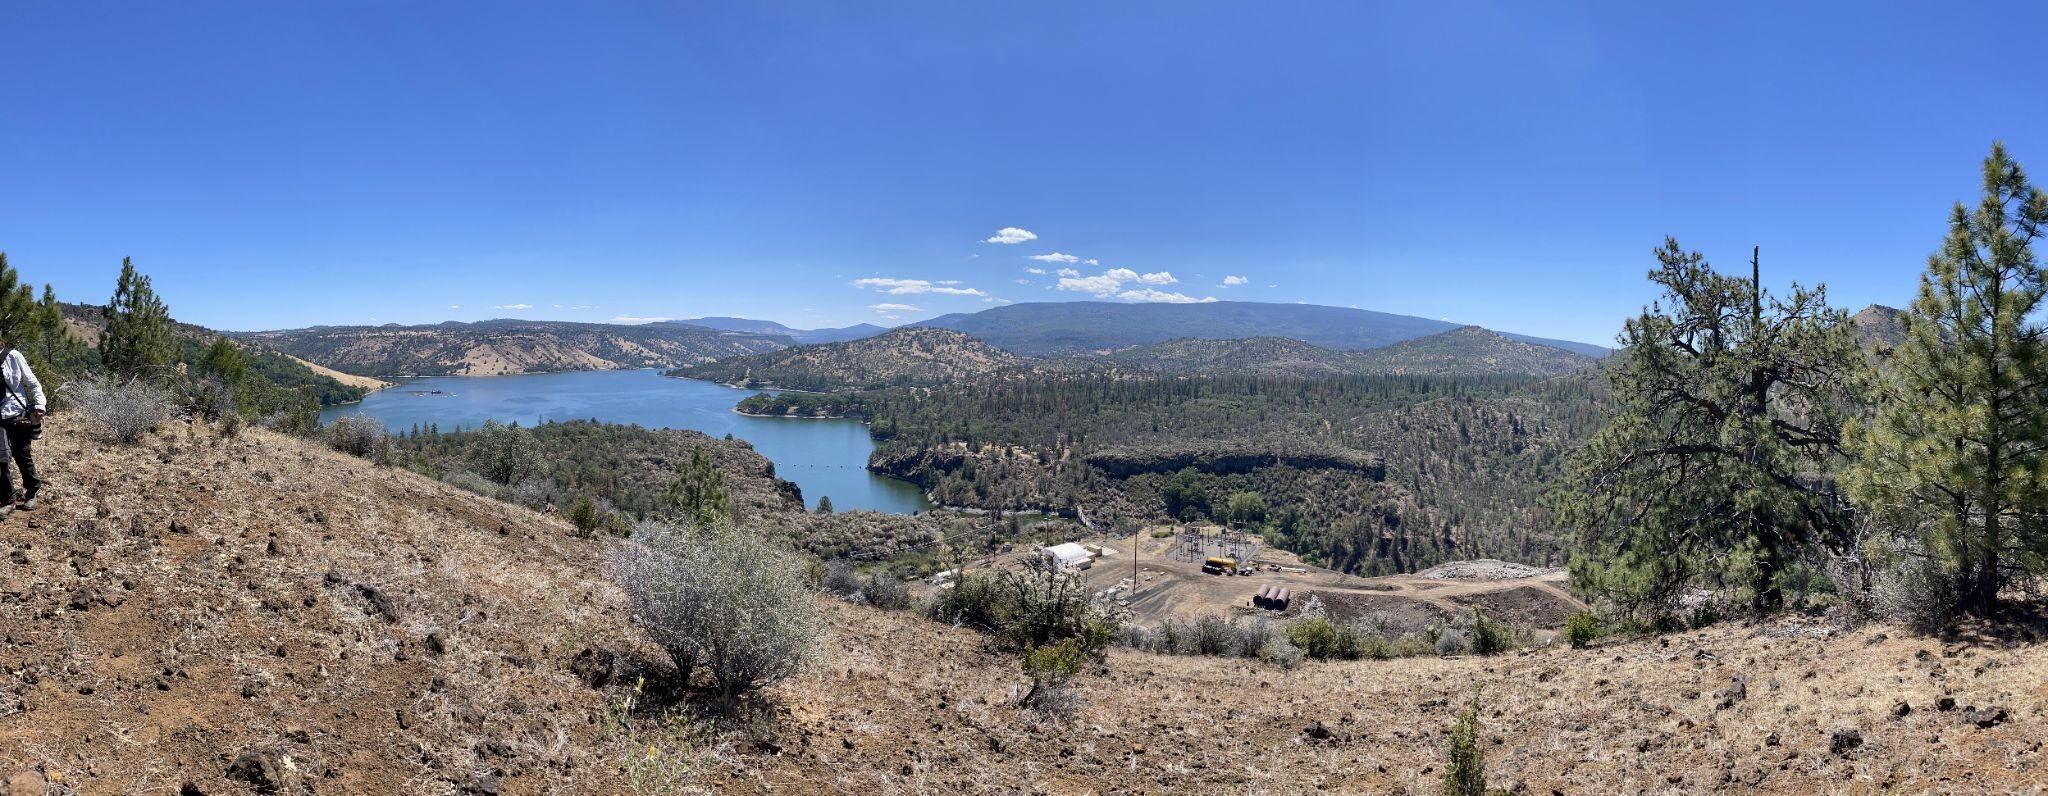 Panorama of Copco Reservoir, Copco Village Construction Site, and Copco 1 Dam. Image Credit Will Harling